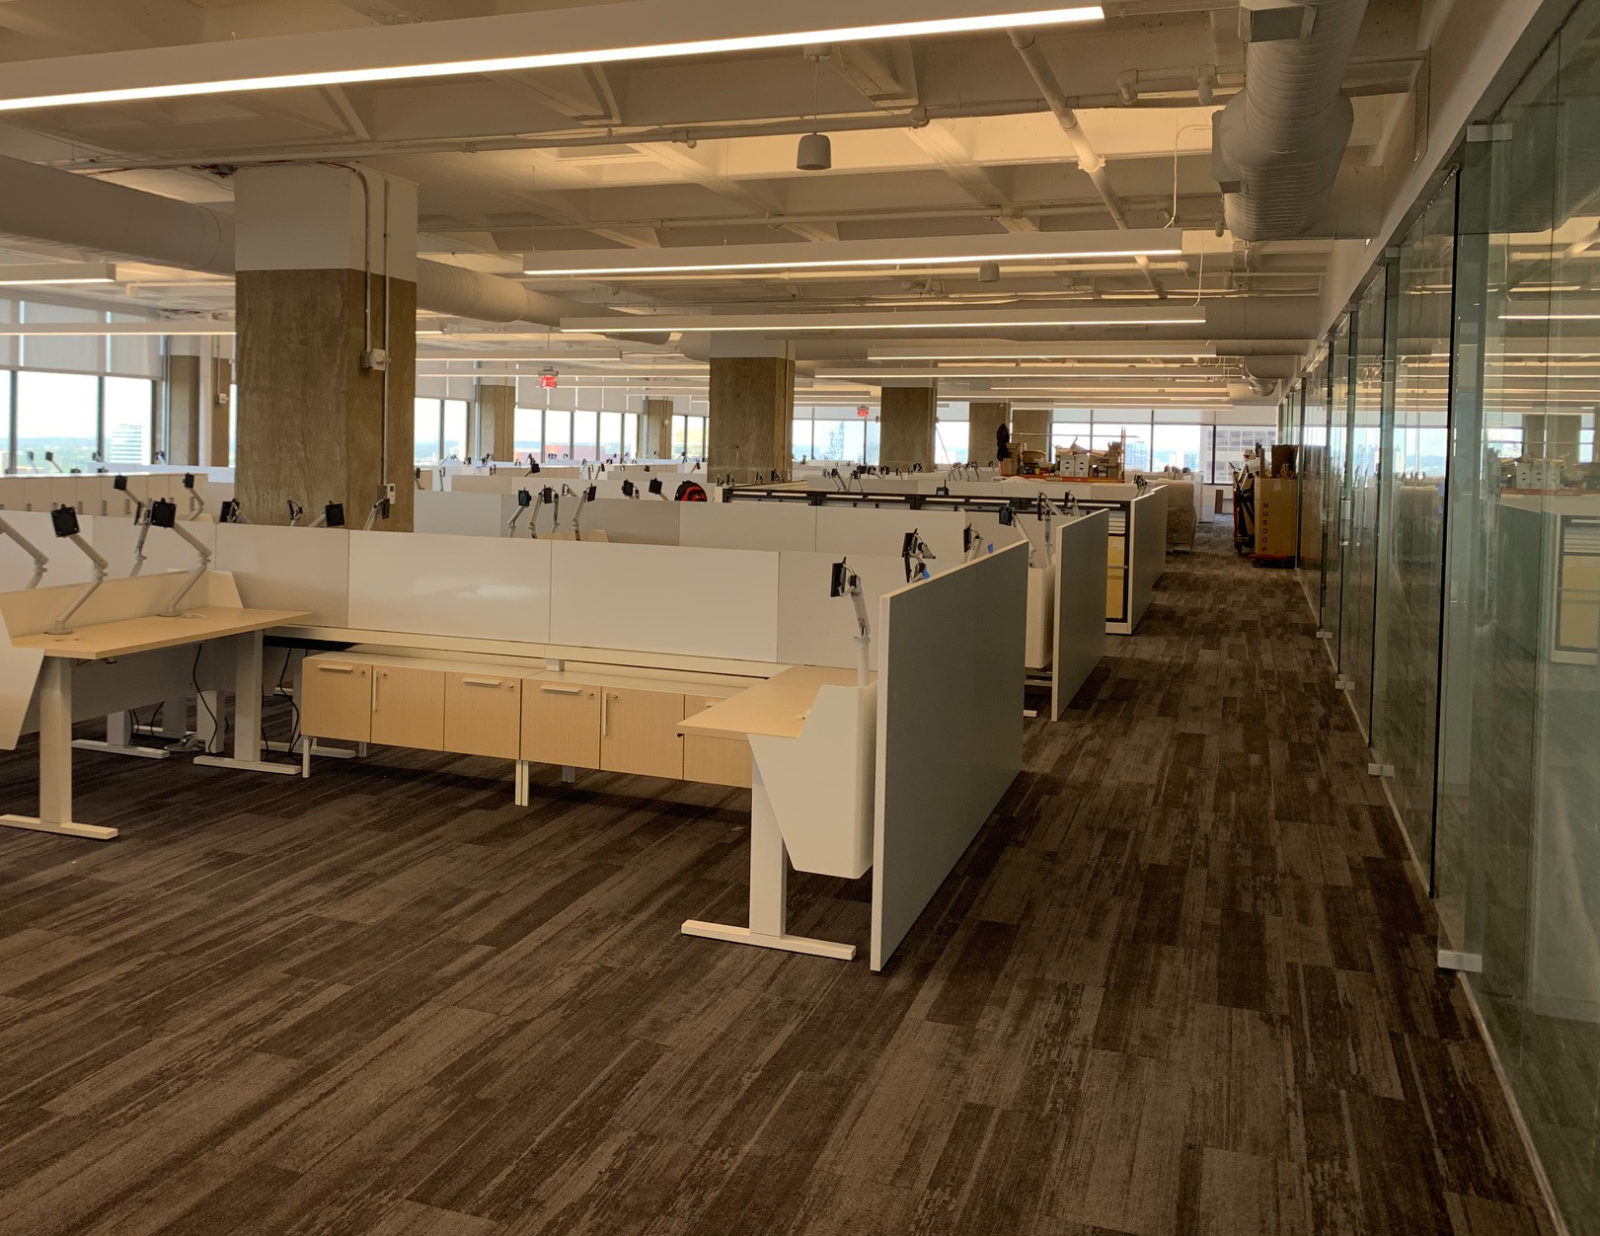 Open area with Herman Miller Vista height-adjustable workstations. Stations are oak laminate with white metal trim and modesty panels